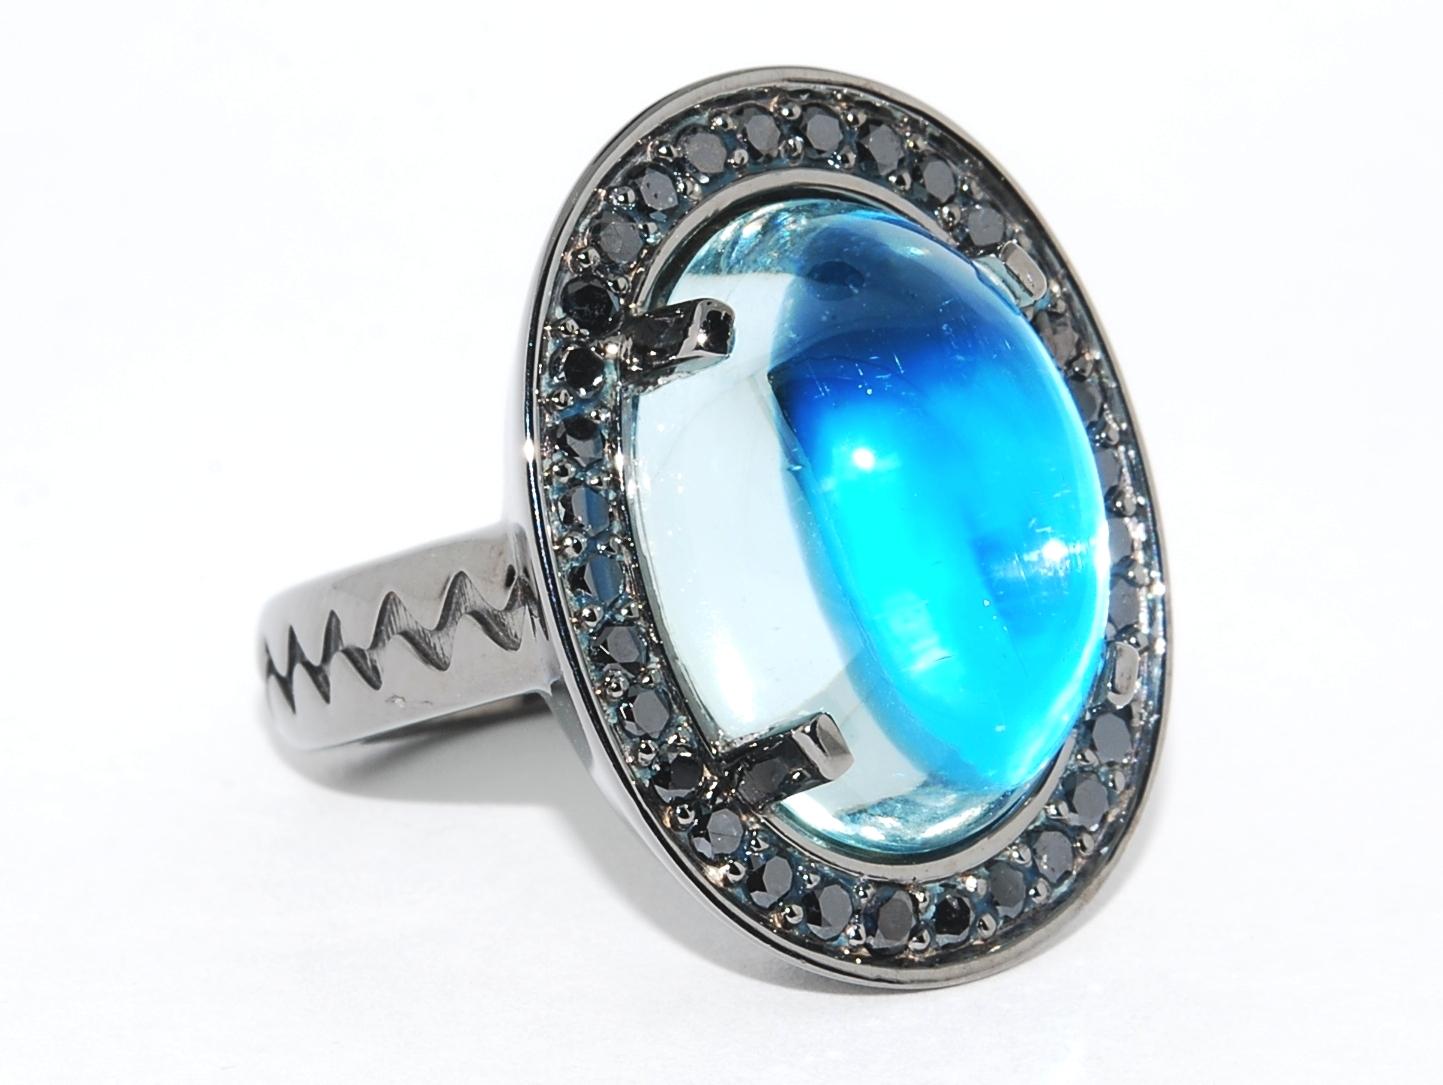 Large oval cabochon Aquamarine set in 17.6 grams of blackened white gold (black rhodium) and surrounded in a halo of black diamonds that have a total carat weight of 0.64 carats. The Aqua measures 17.57 x 12.66.  This is a one of one - and one of a